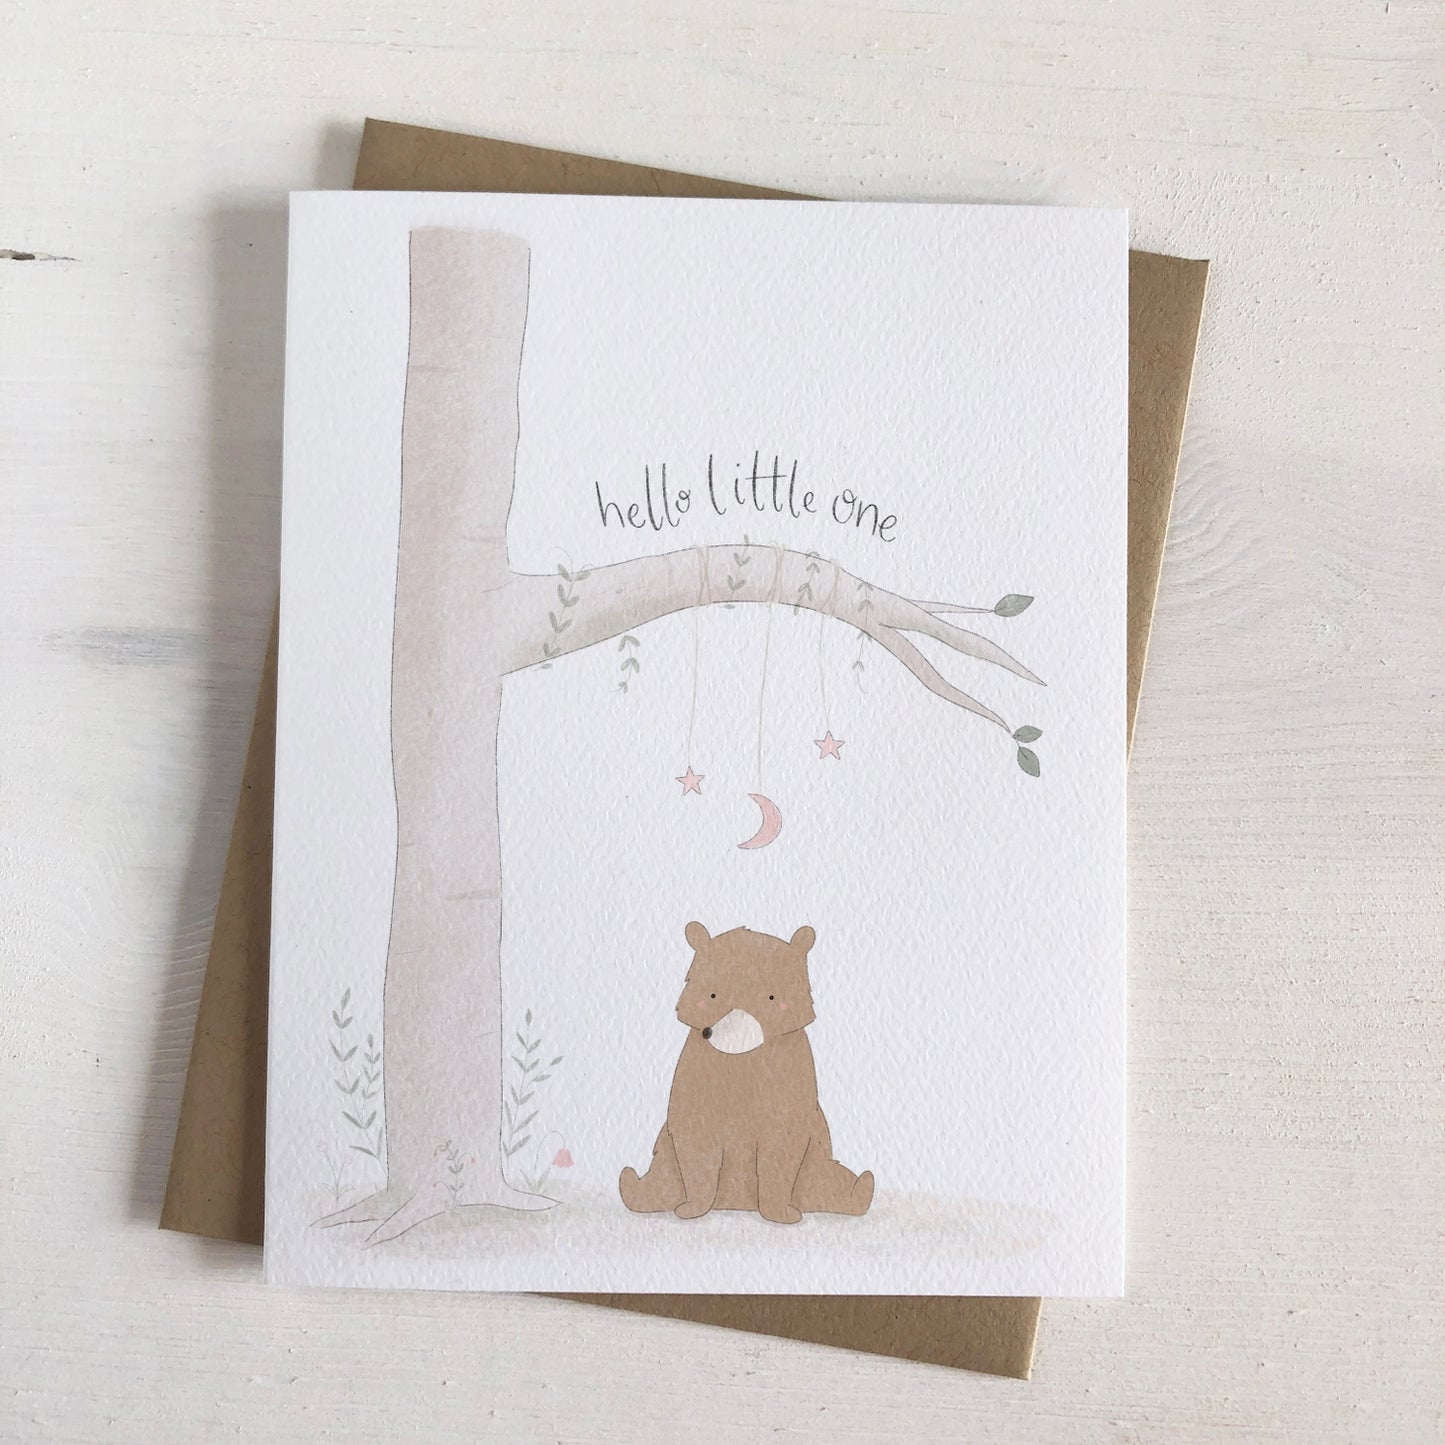 Hello Little One Greeting Card